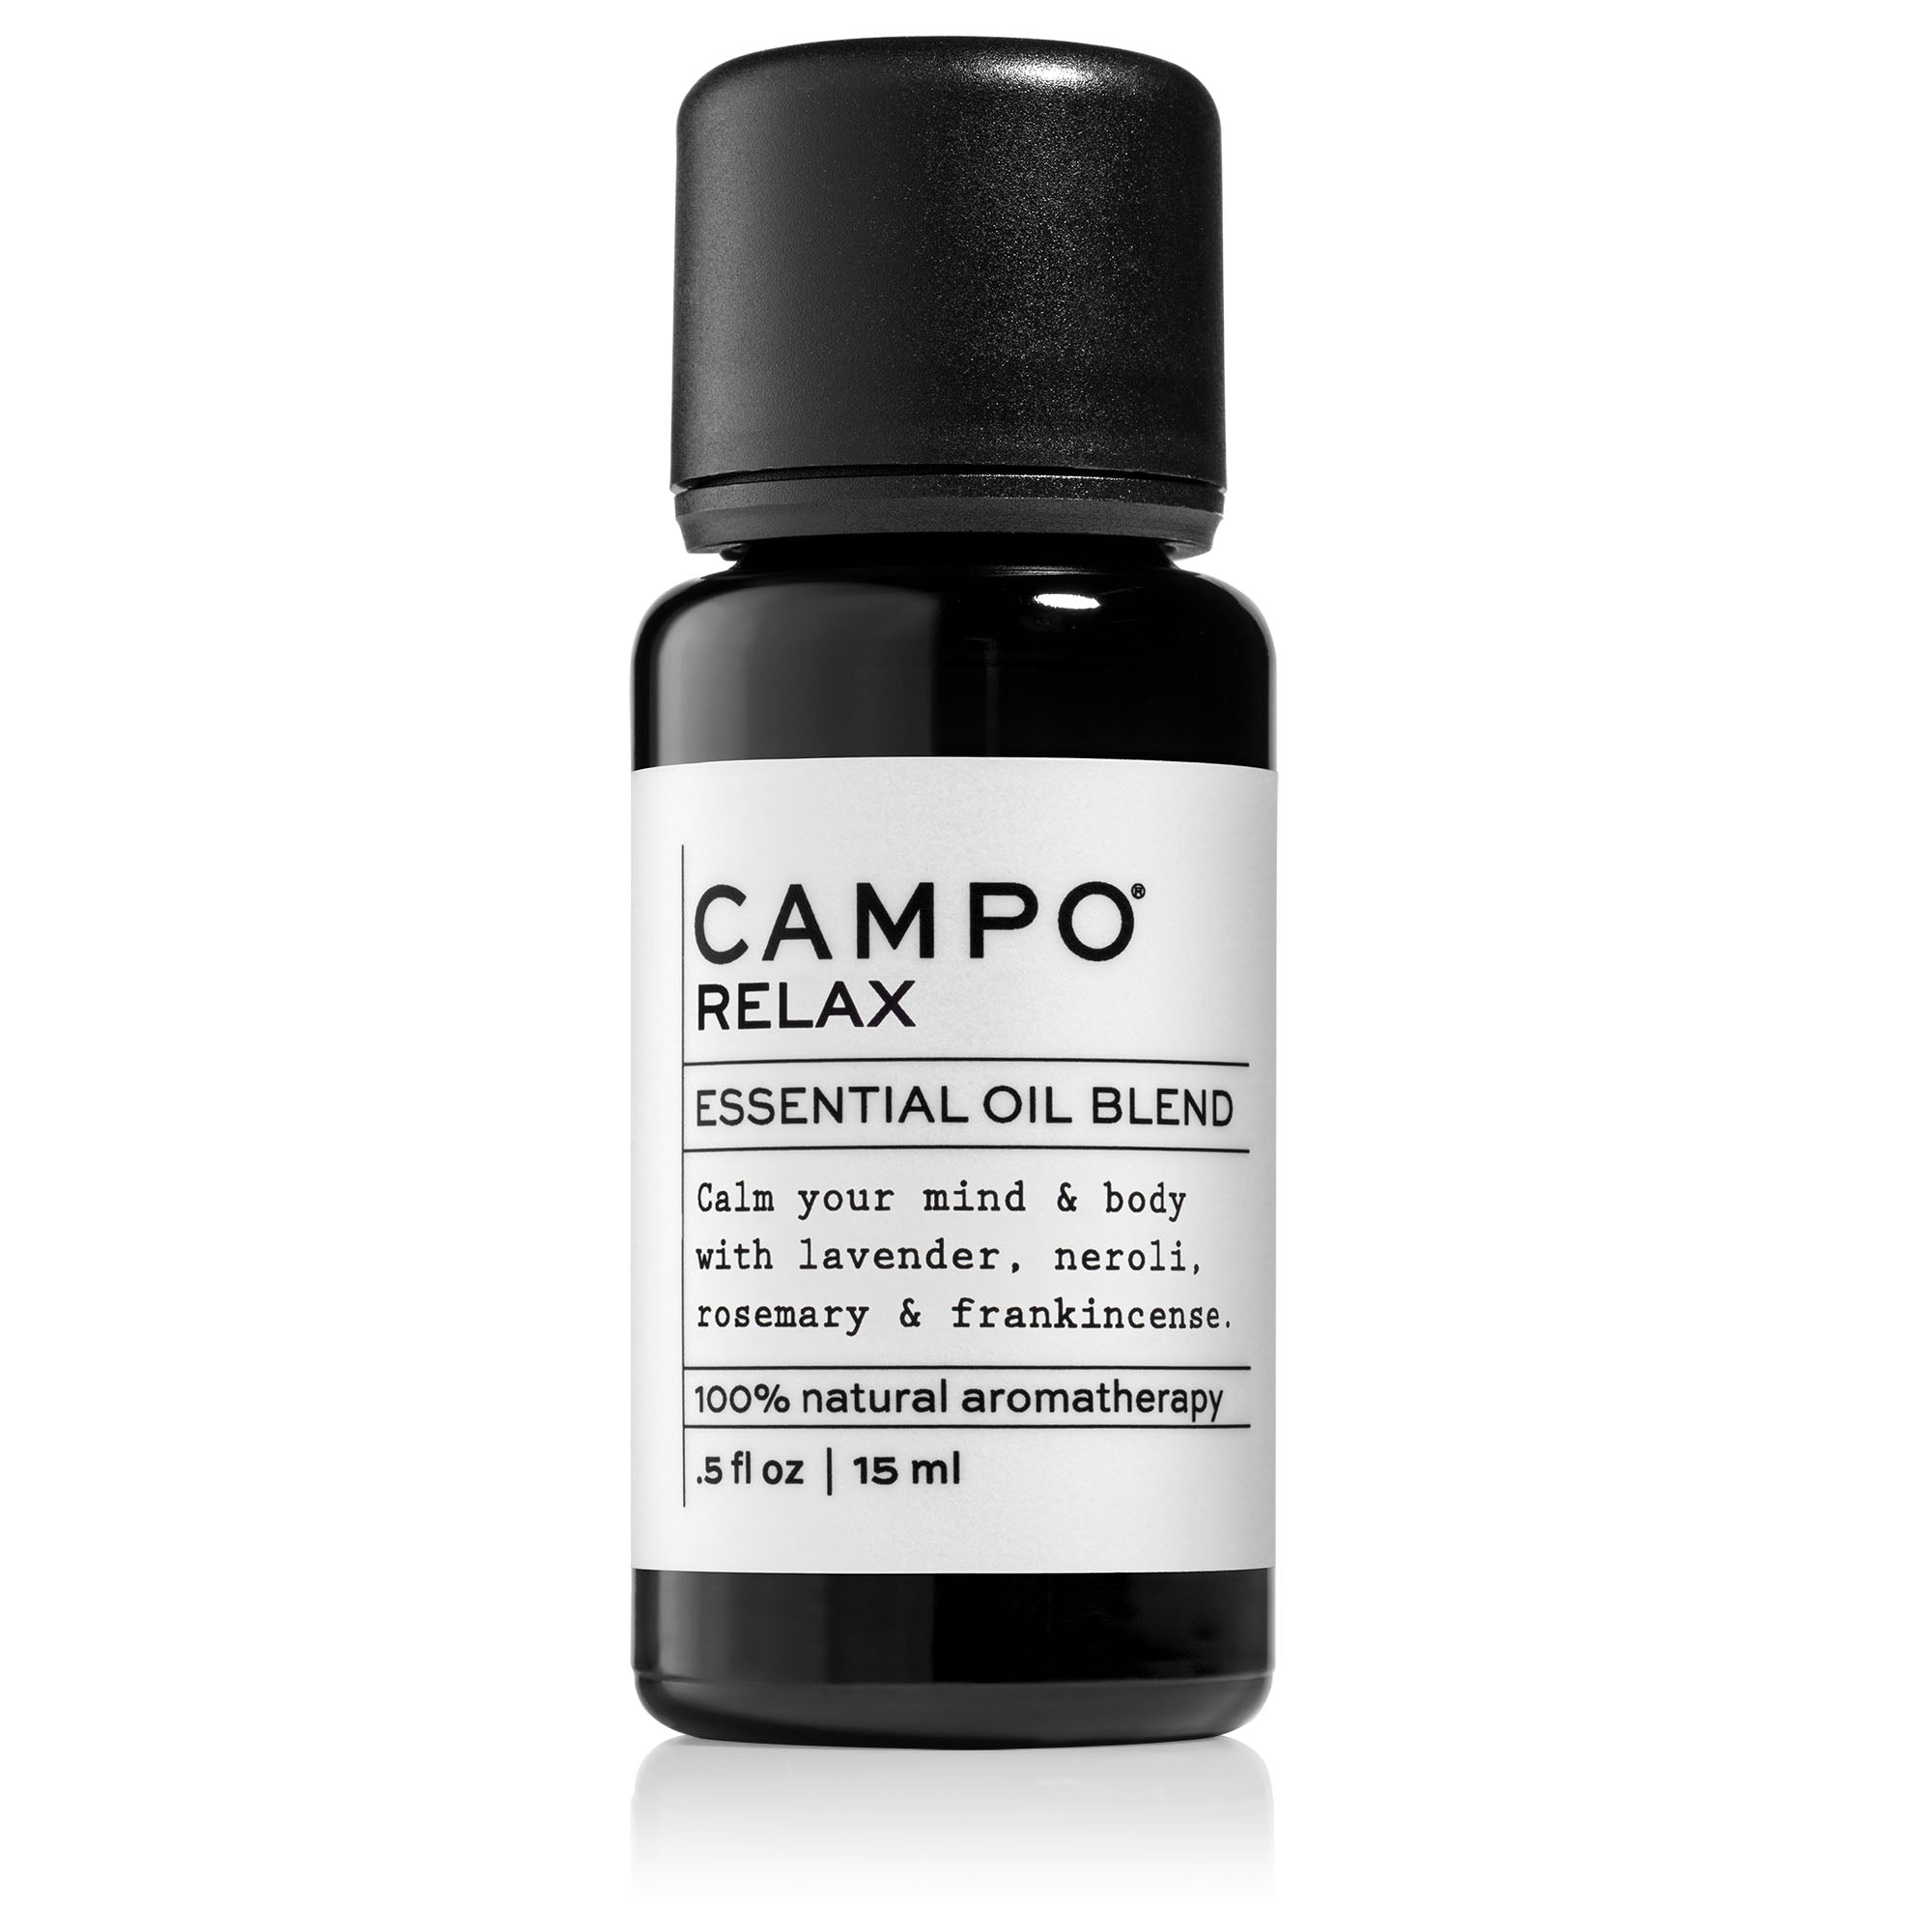 Campo Beauty RELAX Blend 15 ml Essential Oil. Dispels feelings of stress to promote deep relaxation. A calming blend of herbaceous floral notes of French Lavender, Rosemary, Frankincense, Italian Neroli Orange Blossom, Sweet Orange, and Bitter Orange.